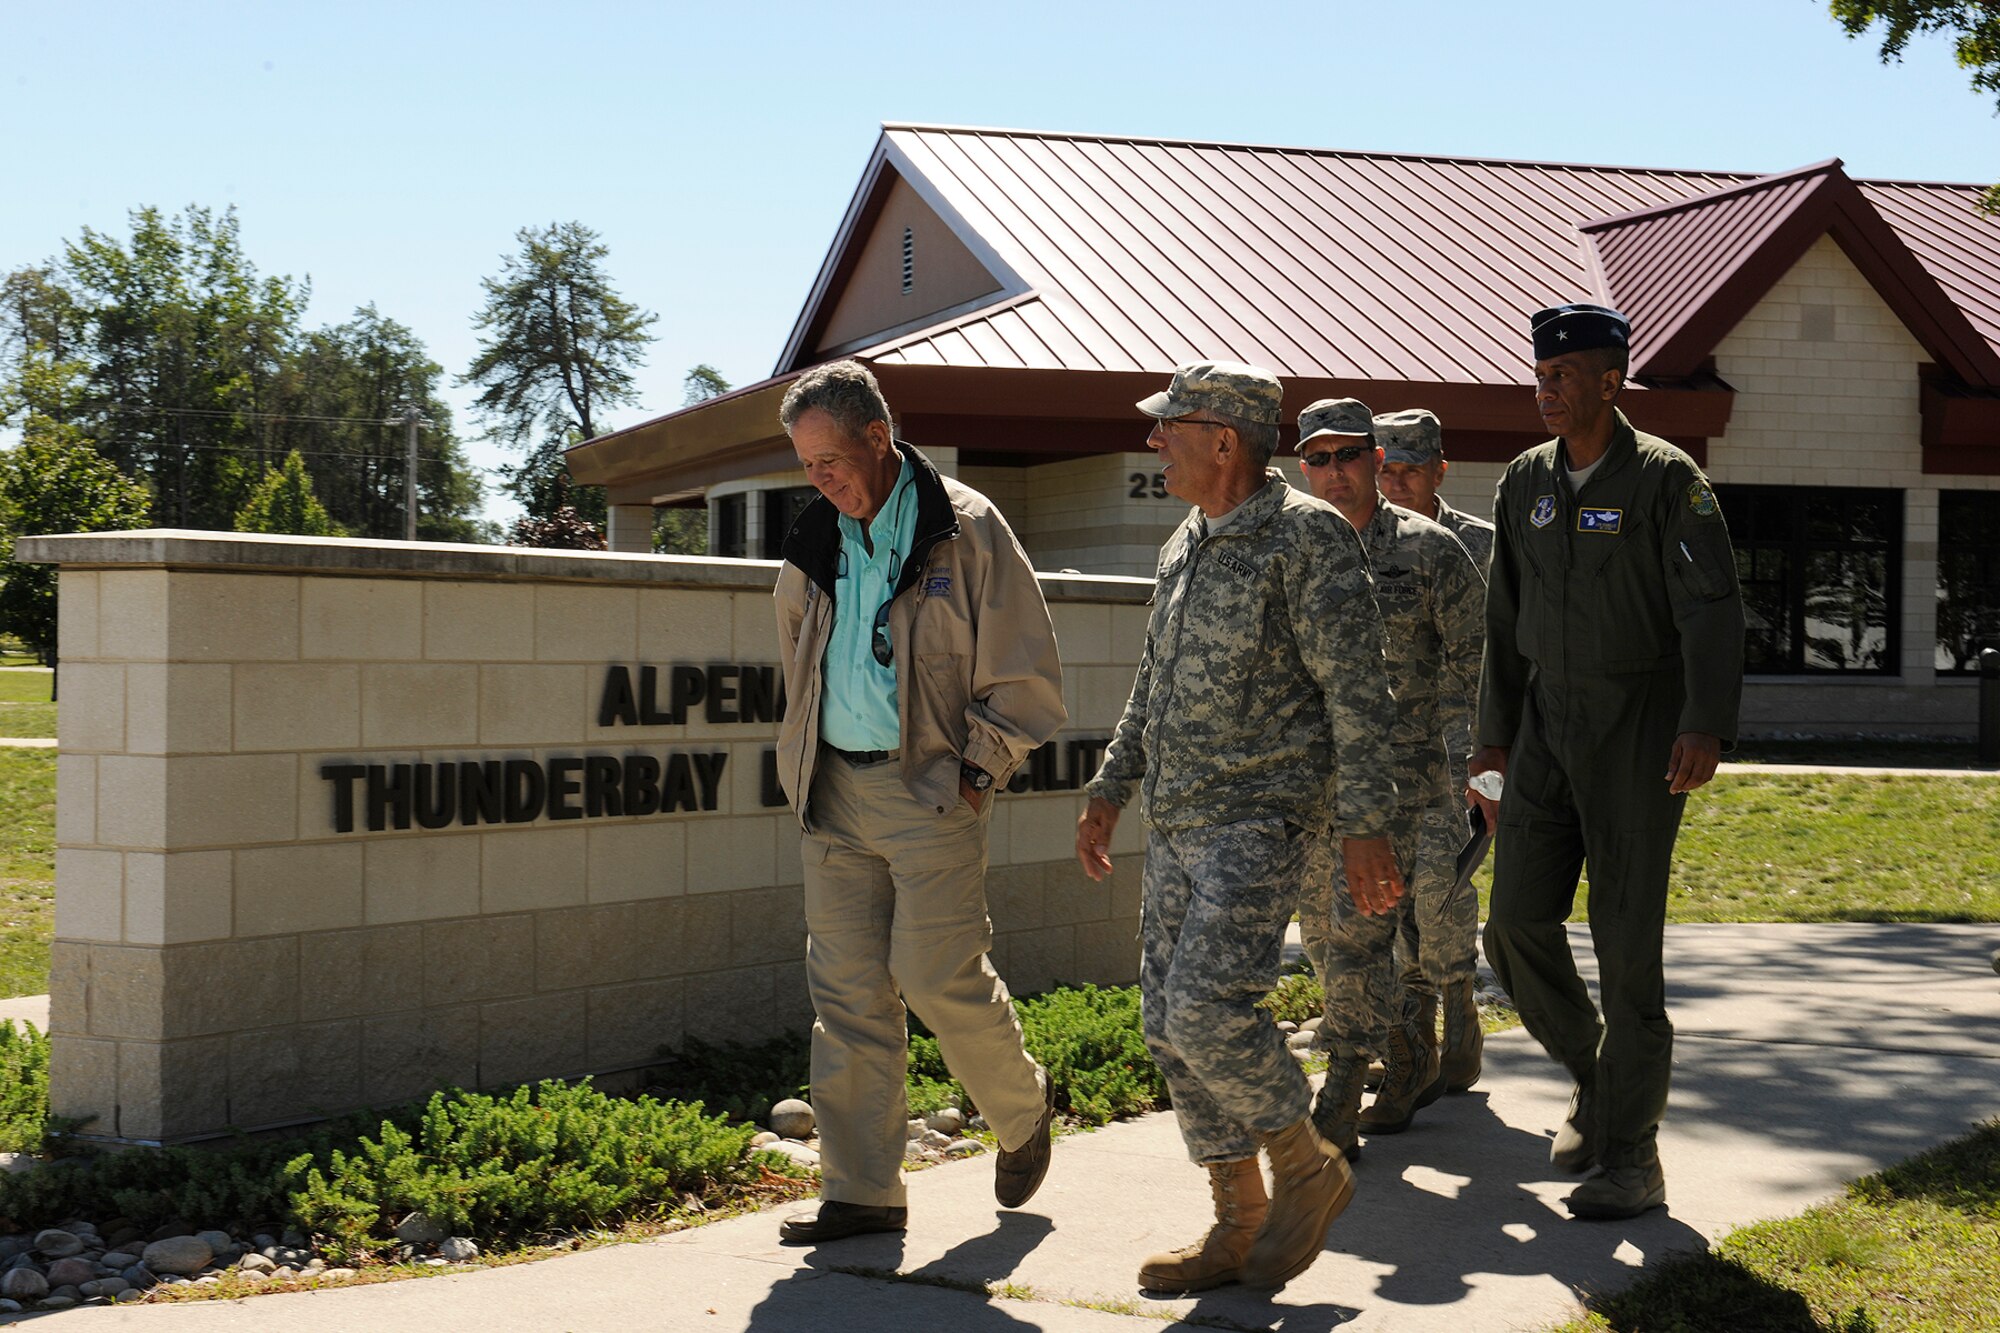 130913-Z-EZ686-250 – Lt. Gen. (ret.) Dennis McCarthy, chairman of the National Commission of the Structure of the Air Force, walks with Major Gen. Gregory Vadnais, the adjutant general of Michigan; Brig. Gen. Leonard Isabelle, commander of the Michigan Air National Guard; and other officers outside while on a visit to the Alpena Combat Readiness Training Center in Alpena, Mich., Sept. 13, 2013. McCarthy visited Alpena and Selfridge Air National Guard Base during the trip. (U.S. Air National Guard photo by MSgt. David Kujawa/Released)